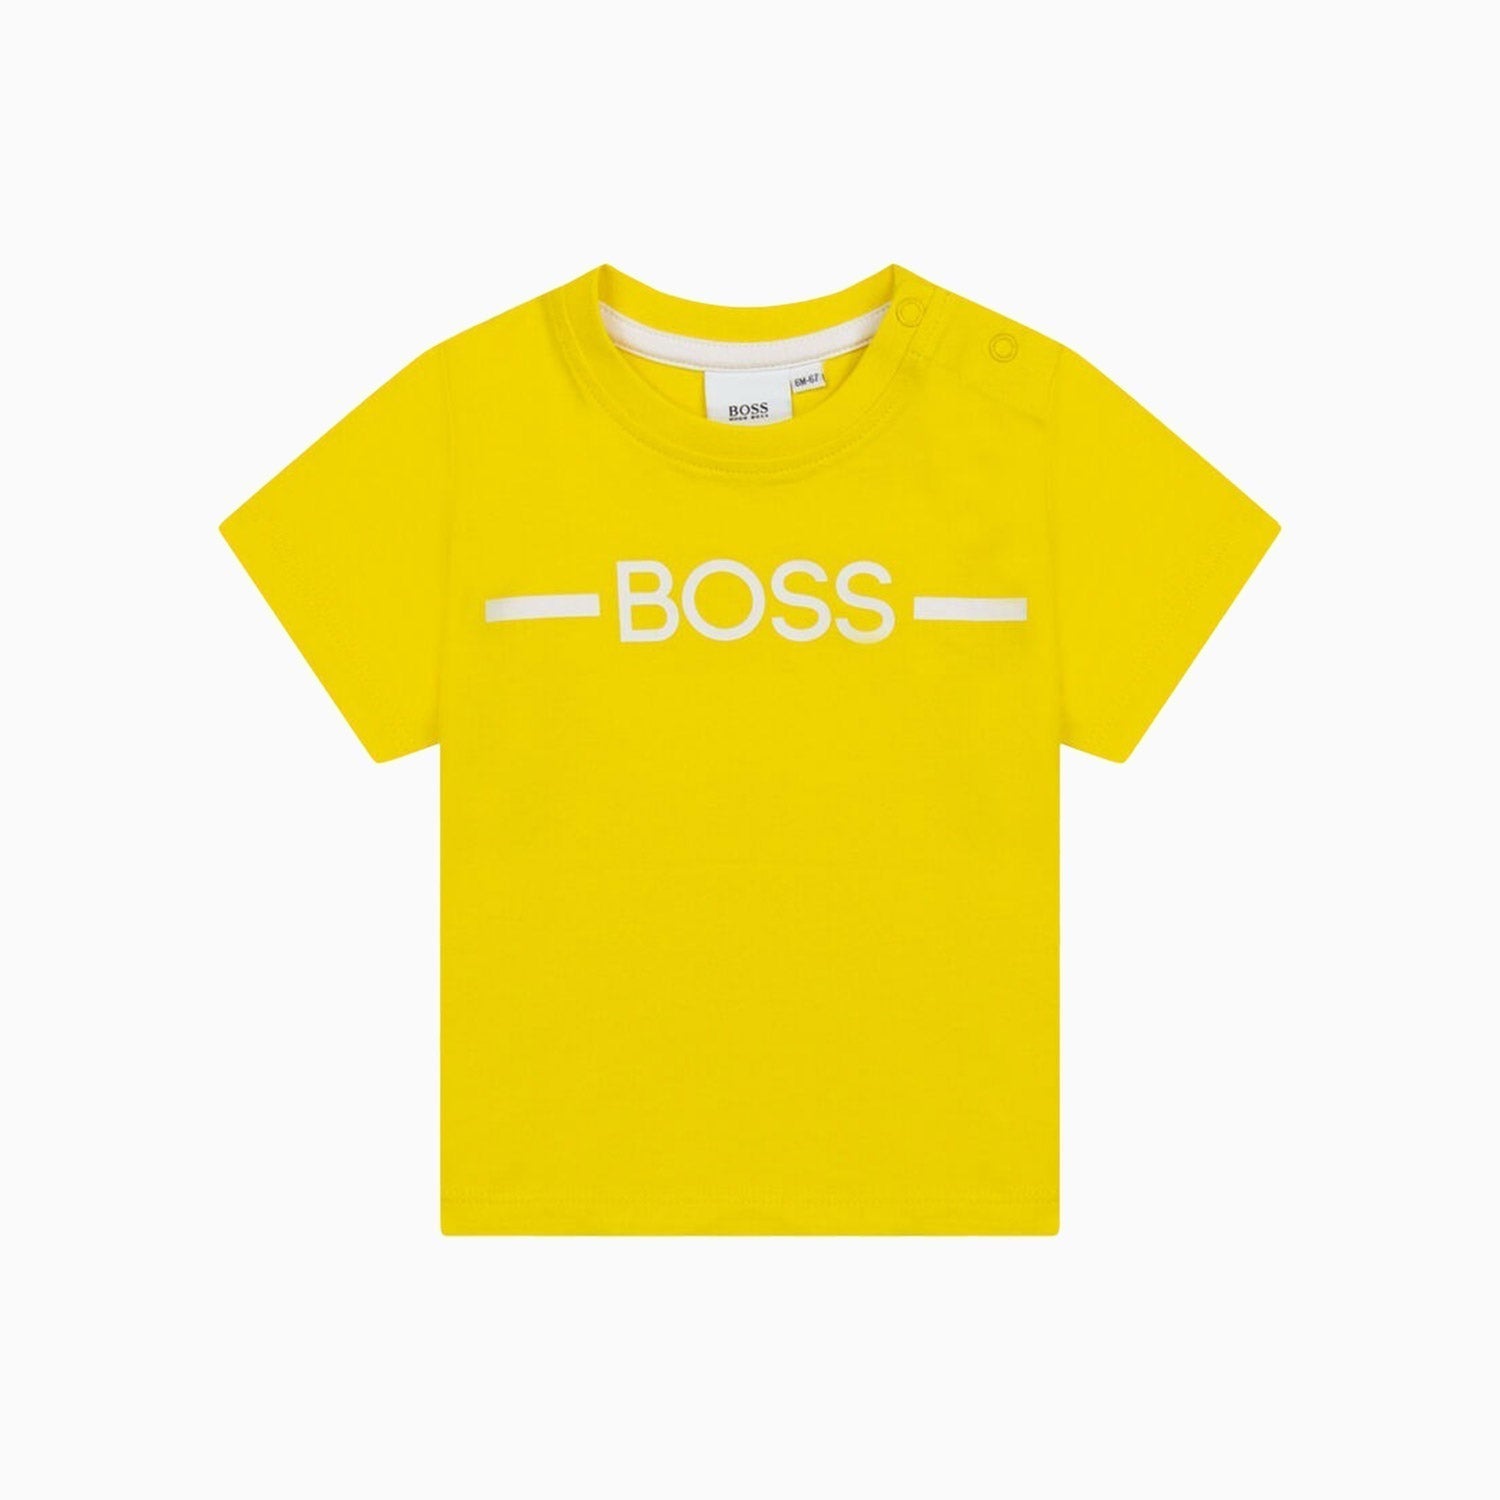 Hugo Boss Kid's Surfer Outfit Toddlers - Color: Navy, Electric Blue, Green, Yellow, White, Red - Kids Premium Clothing -